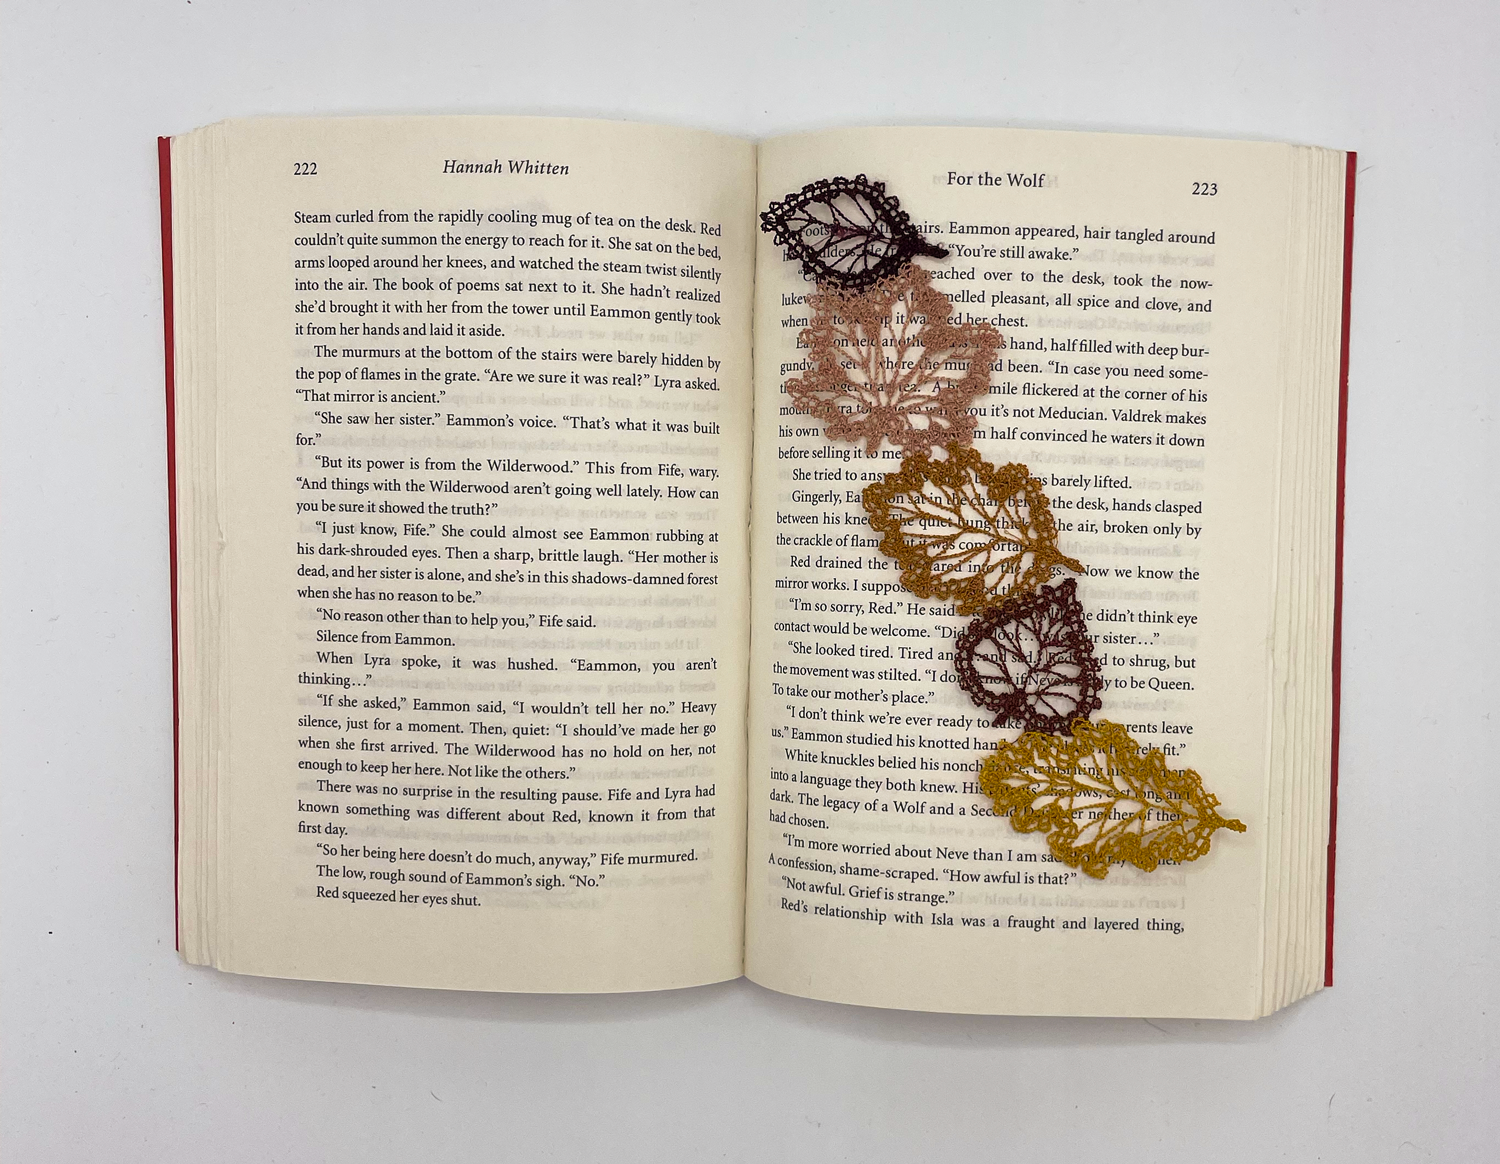 "Add a Touch of Elegance to Your Reading: Lovely Lace Embroidered Autumn Leaf Bookmark!"